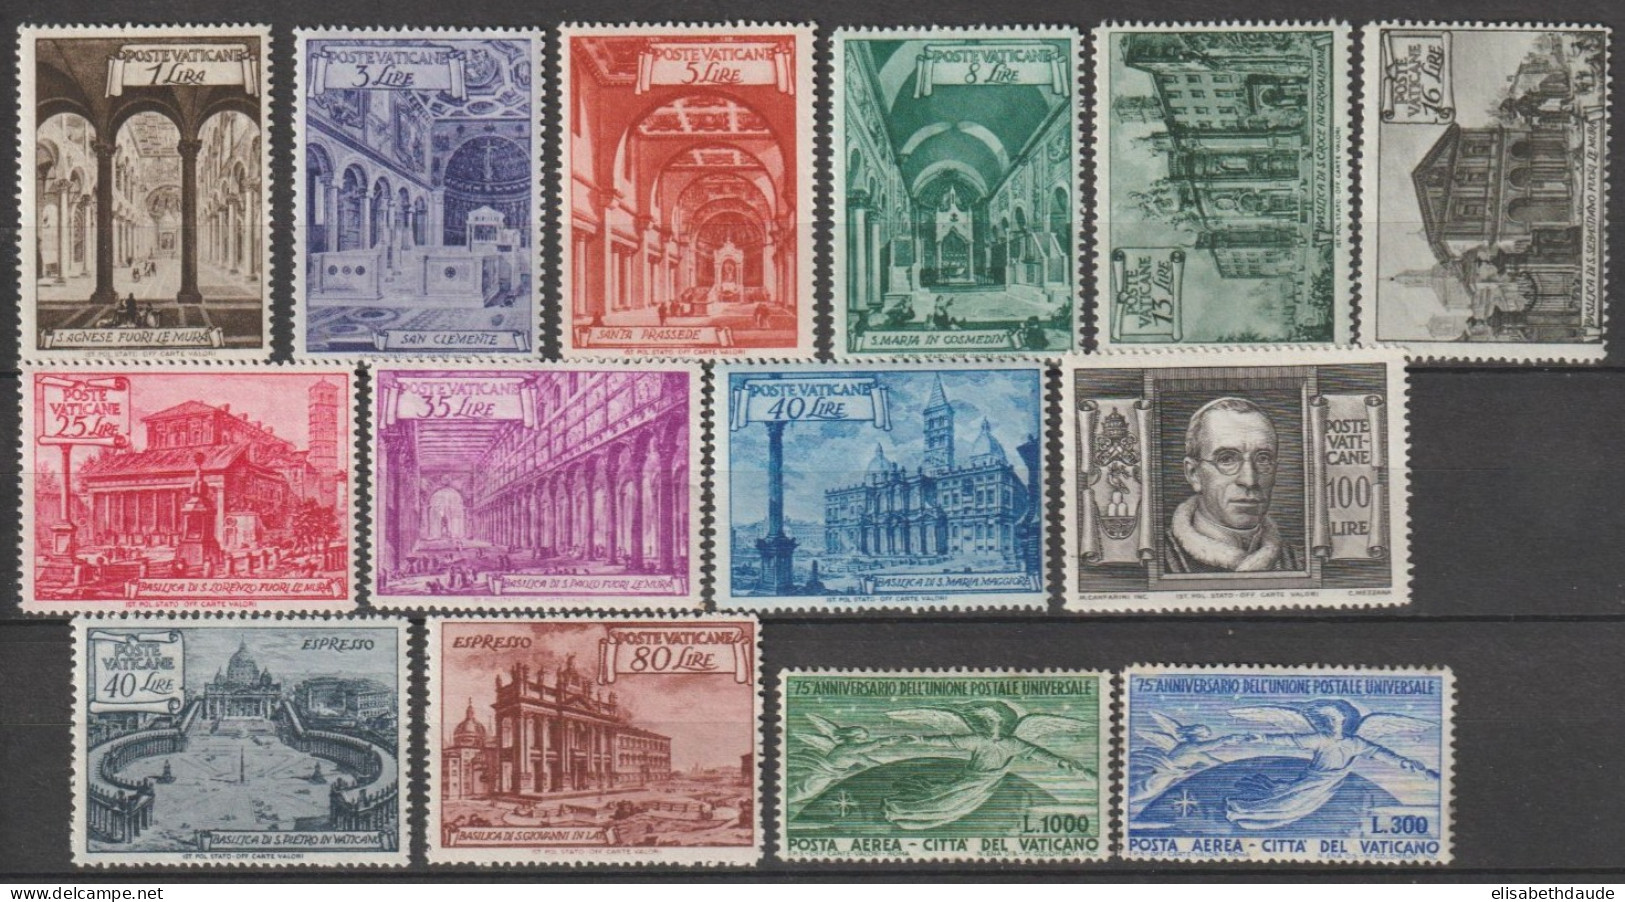 VATICAN - 1949 - ANNEE COMPLETE AVEC POSTE AERIENNE ET EXPRES ! YVERT N°140/149+A18/19+EXP11/12 ** MNH -COTE = 392.5 EUR - Full Years